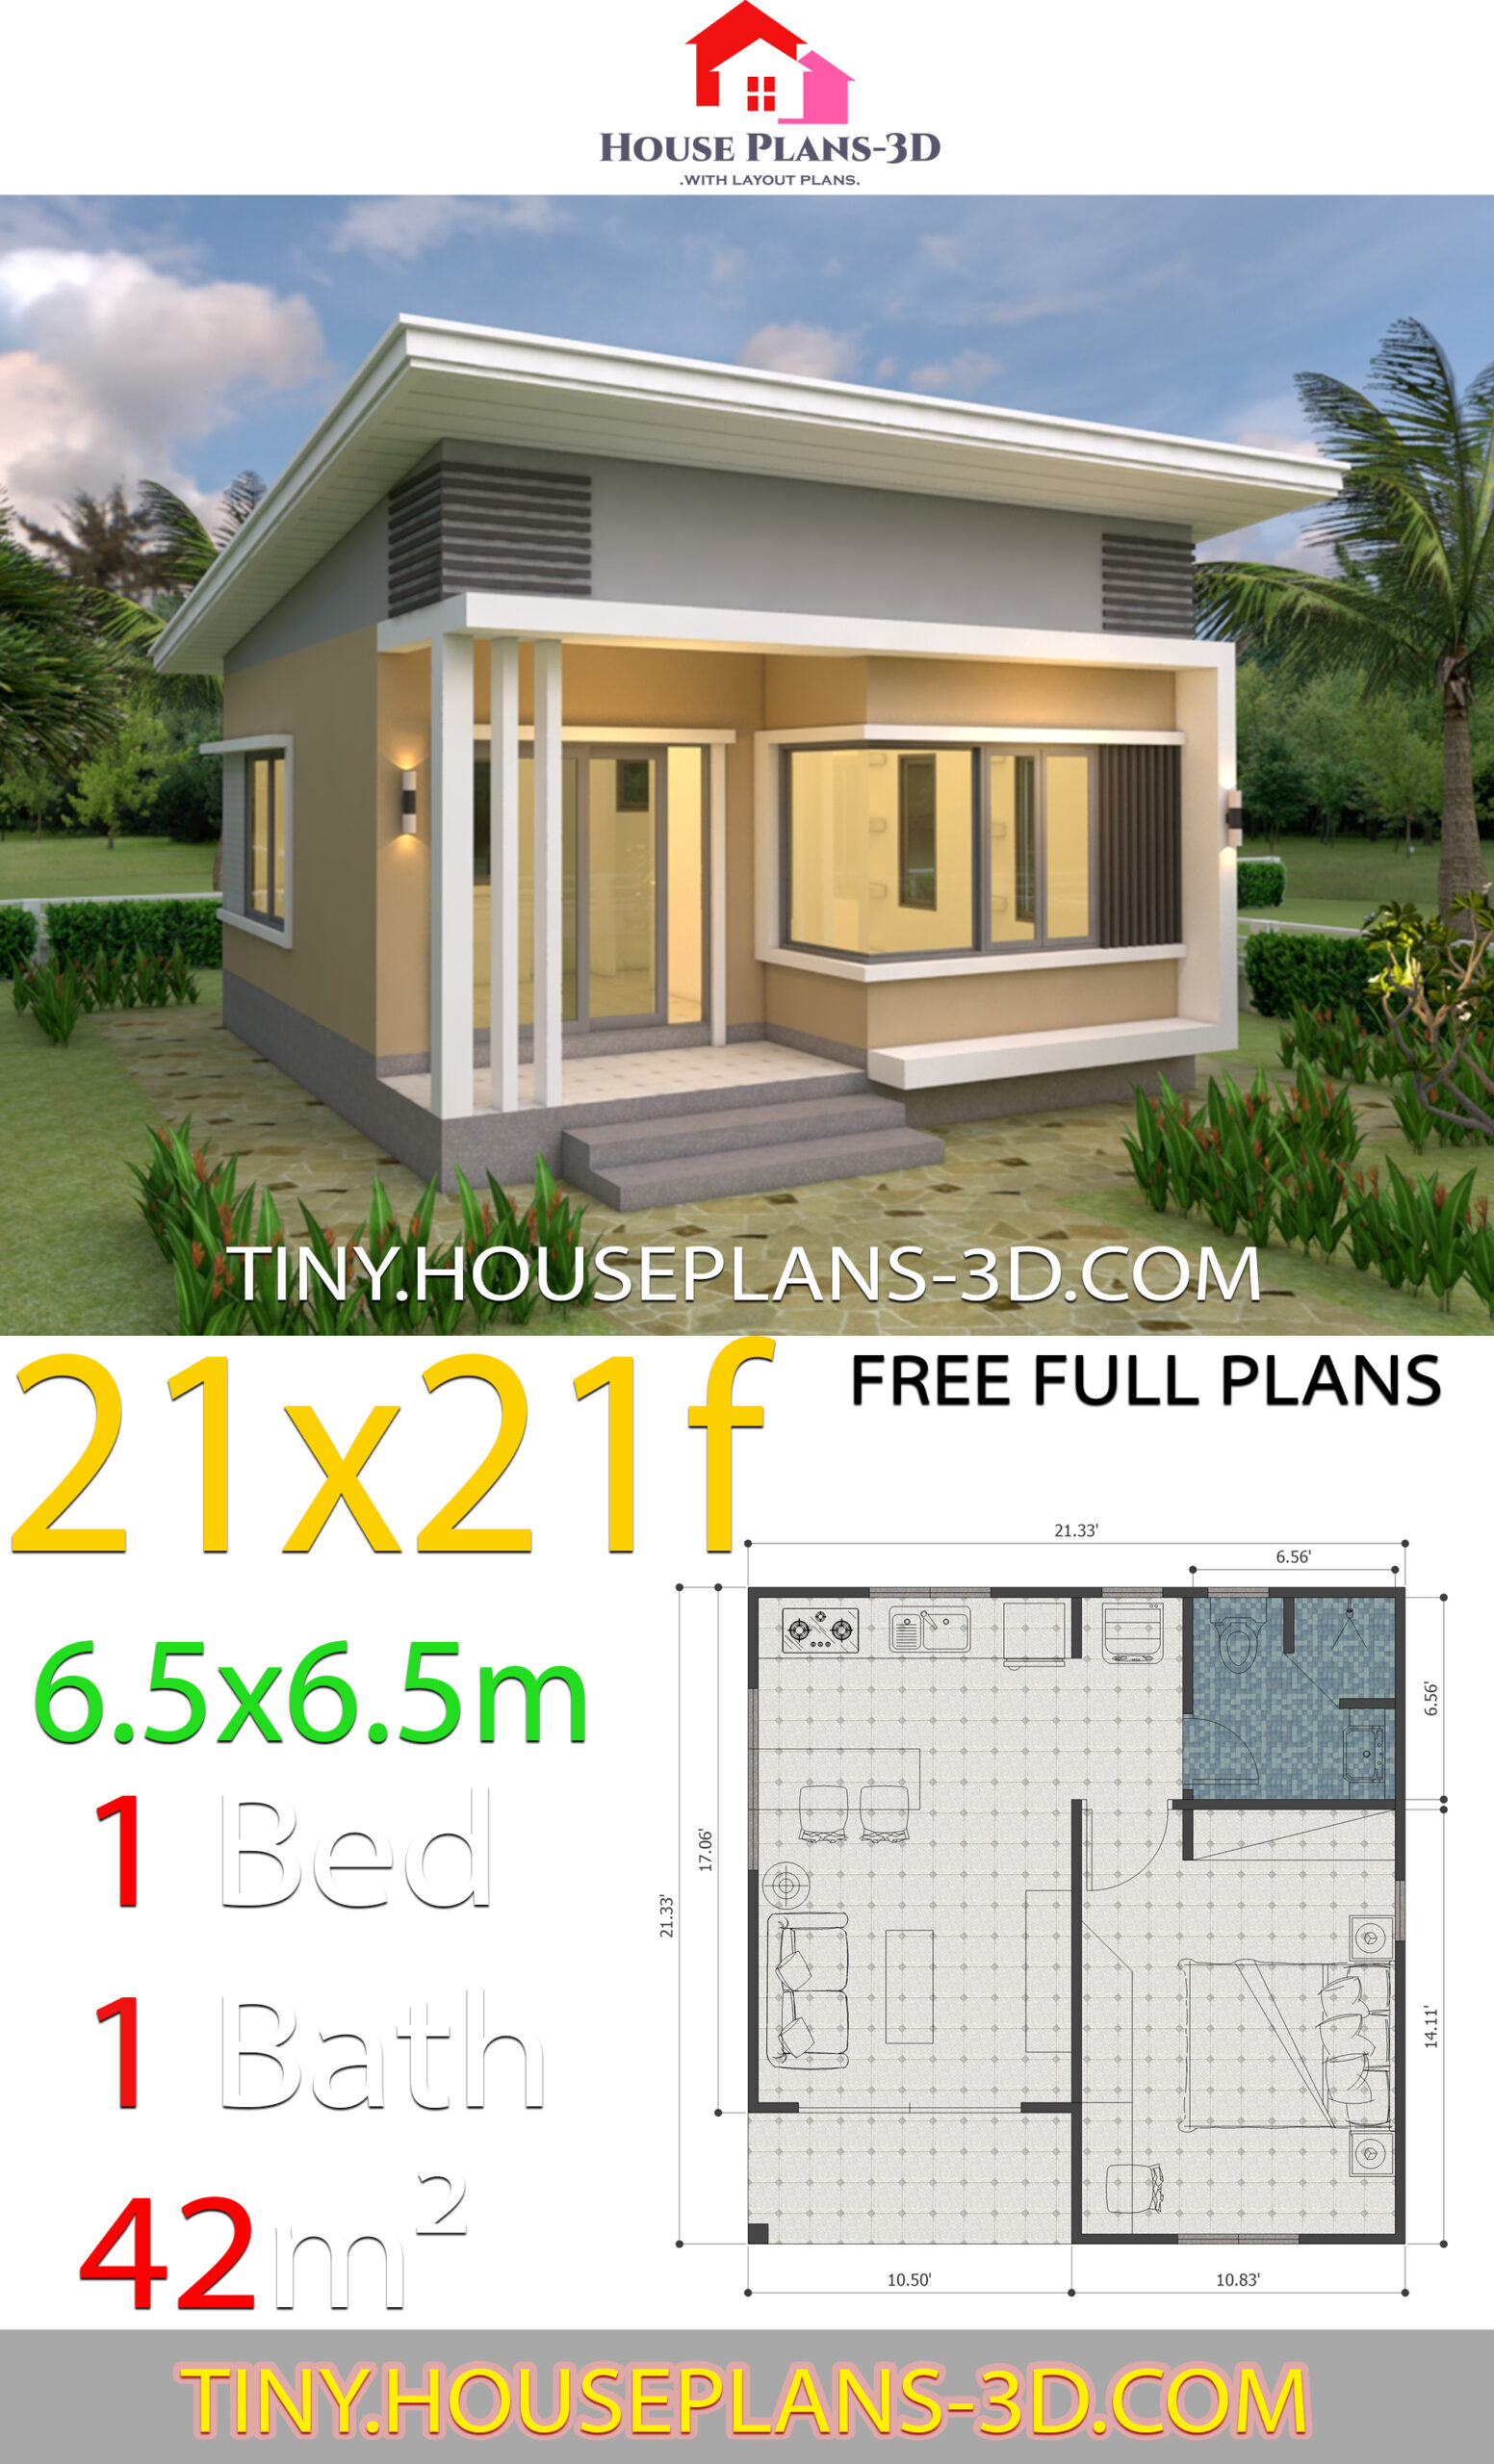 Shed roof Simple House Plans 21x21 Feet 6.5x6.5m